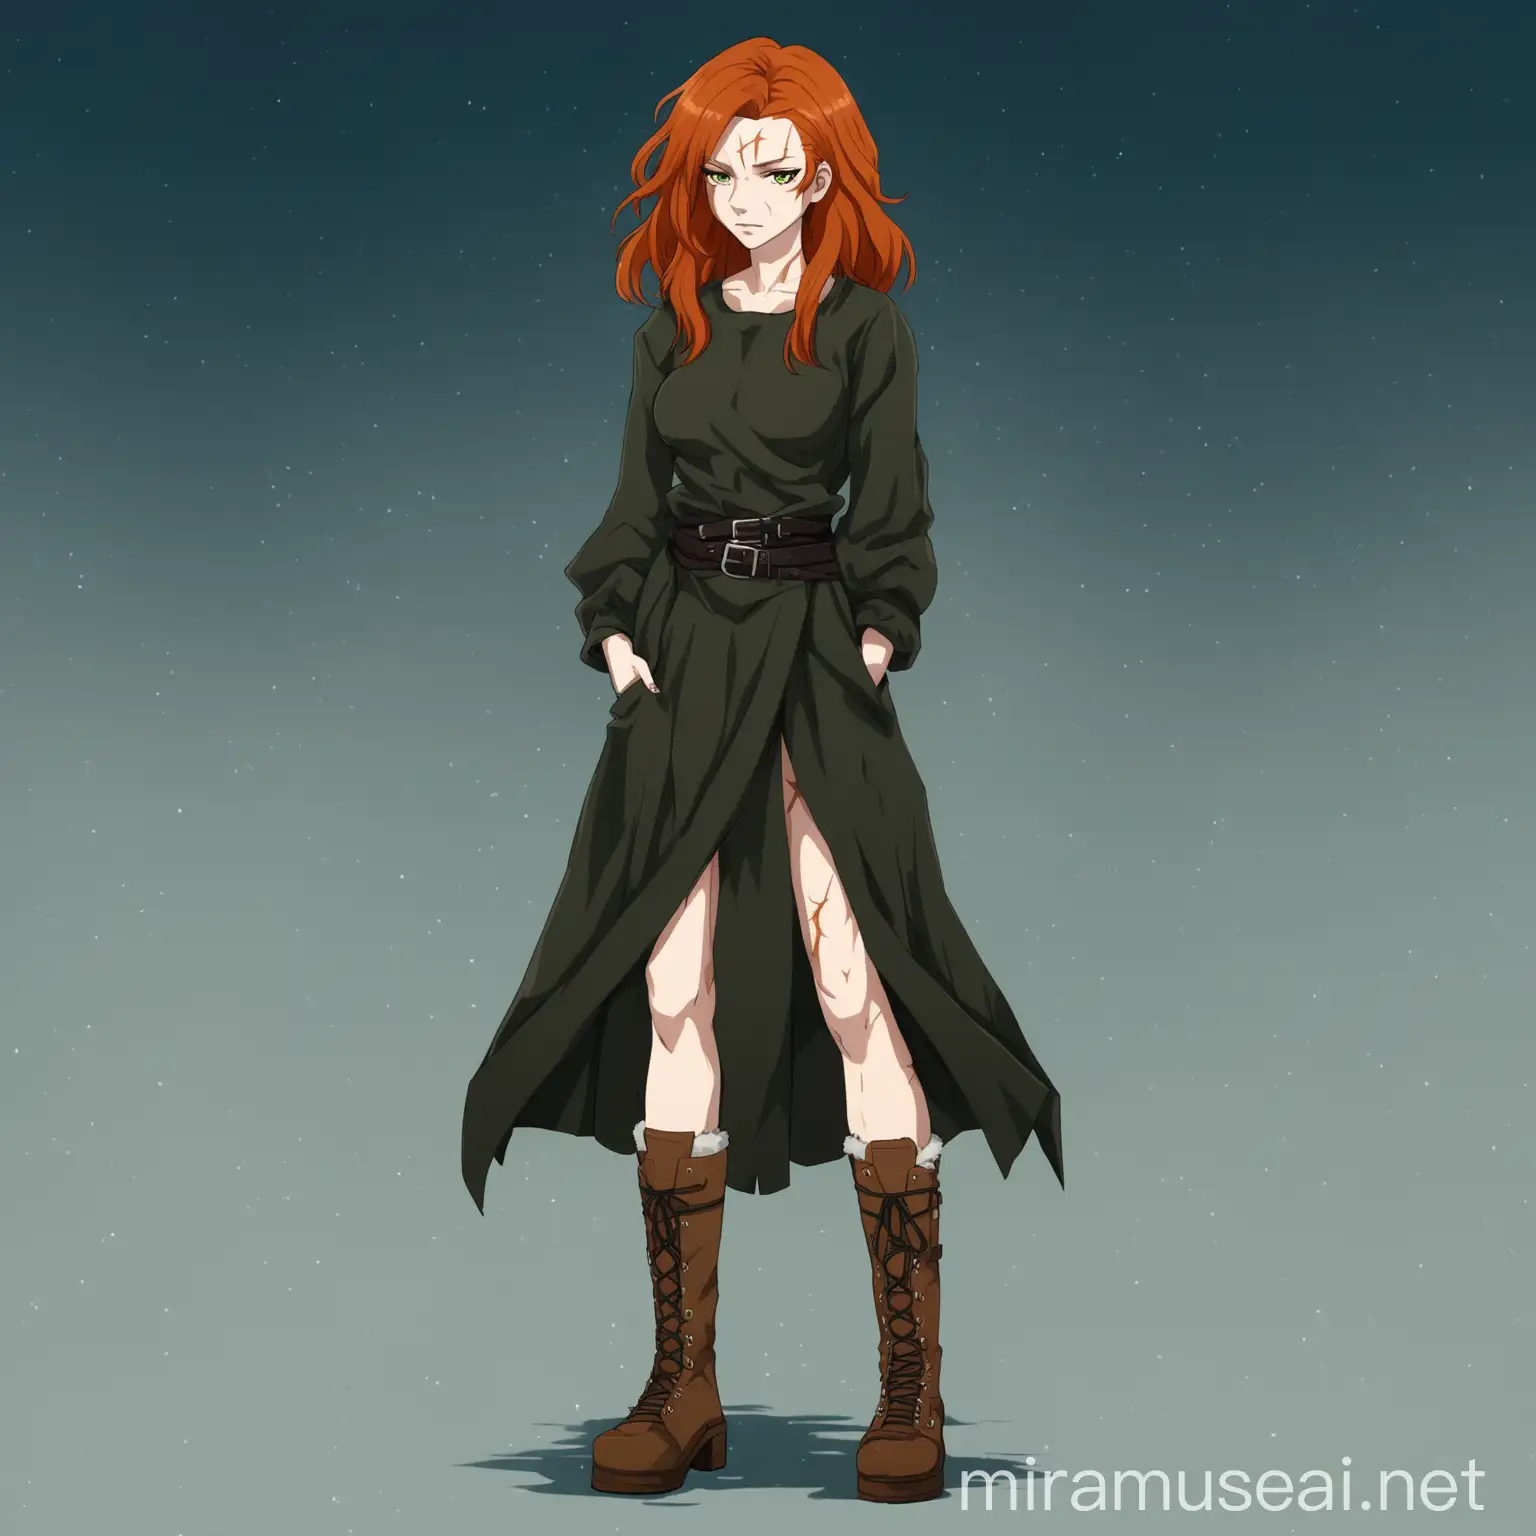 northern woman, ginger hair, beautiful, scar, full body, anime style